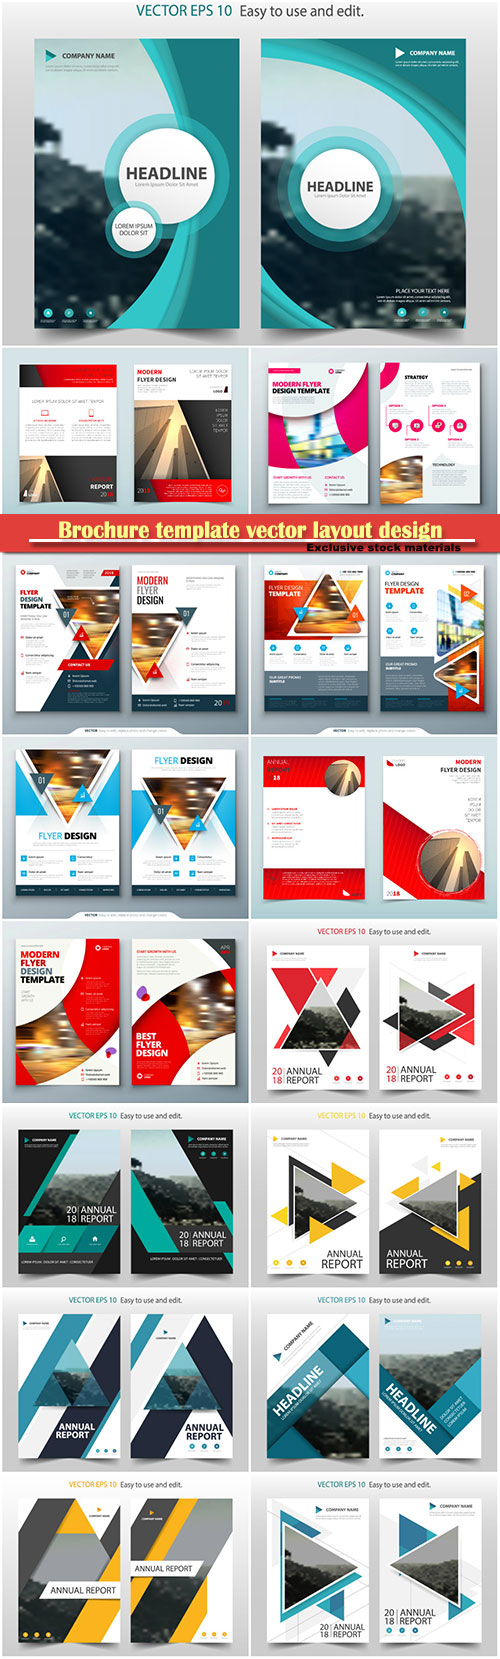 Brochure template vector layout design, corporate business annual report, magazine, flyer mockup # 109